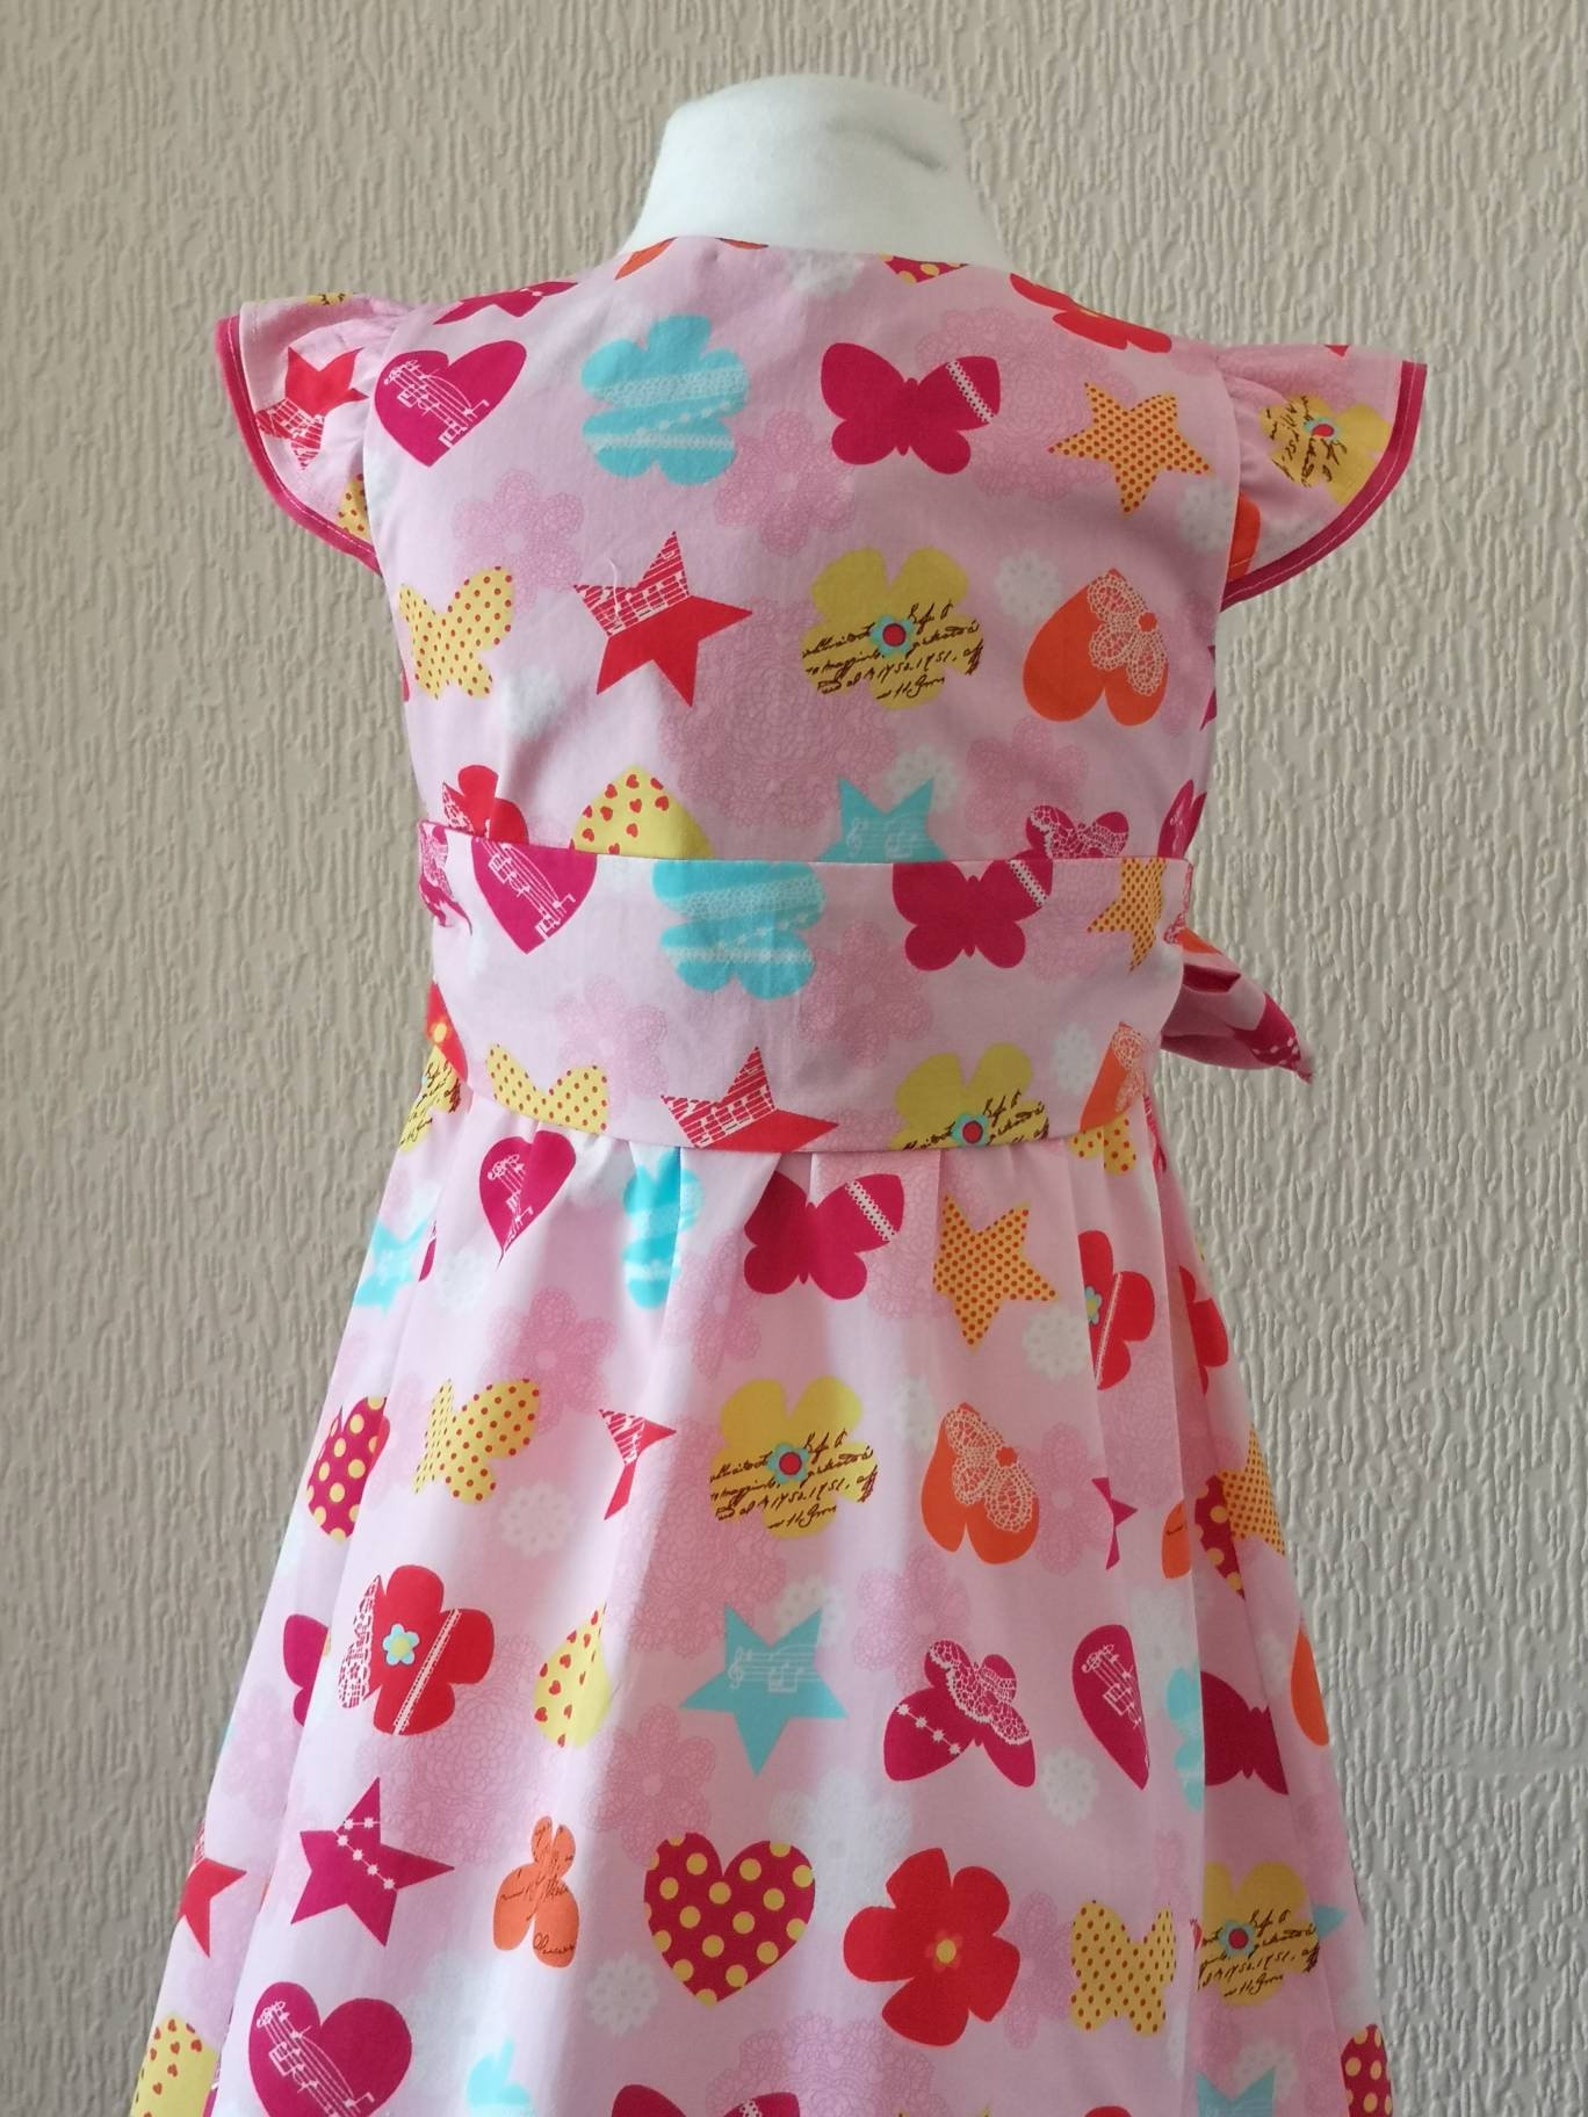 Child's Crossover dress in cotton fabric in pink with | Etsy